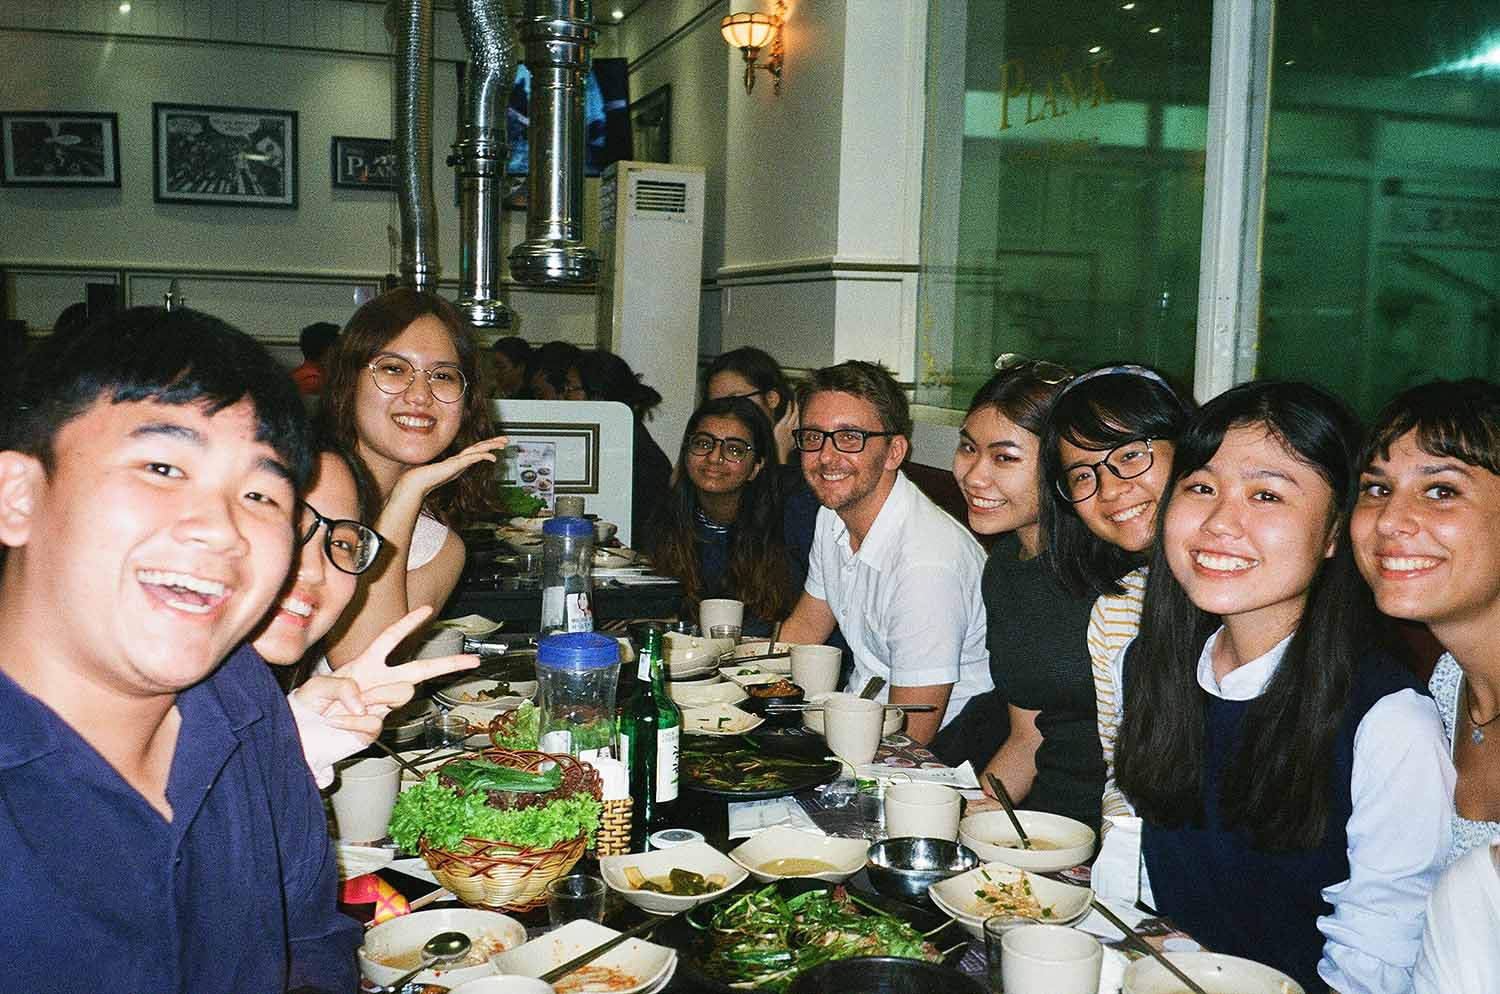 group of students at a restaurant smiling at the camera